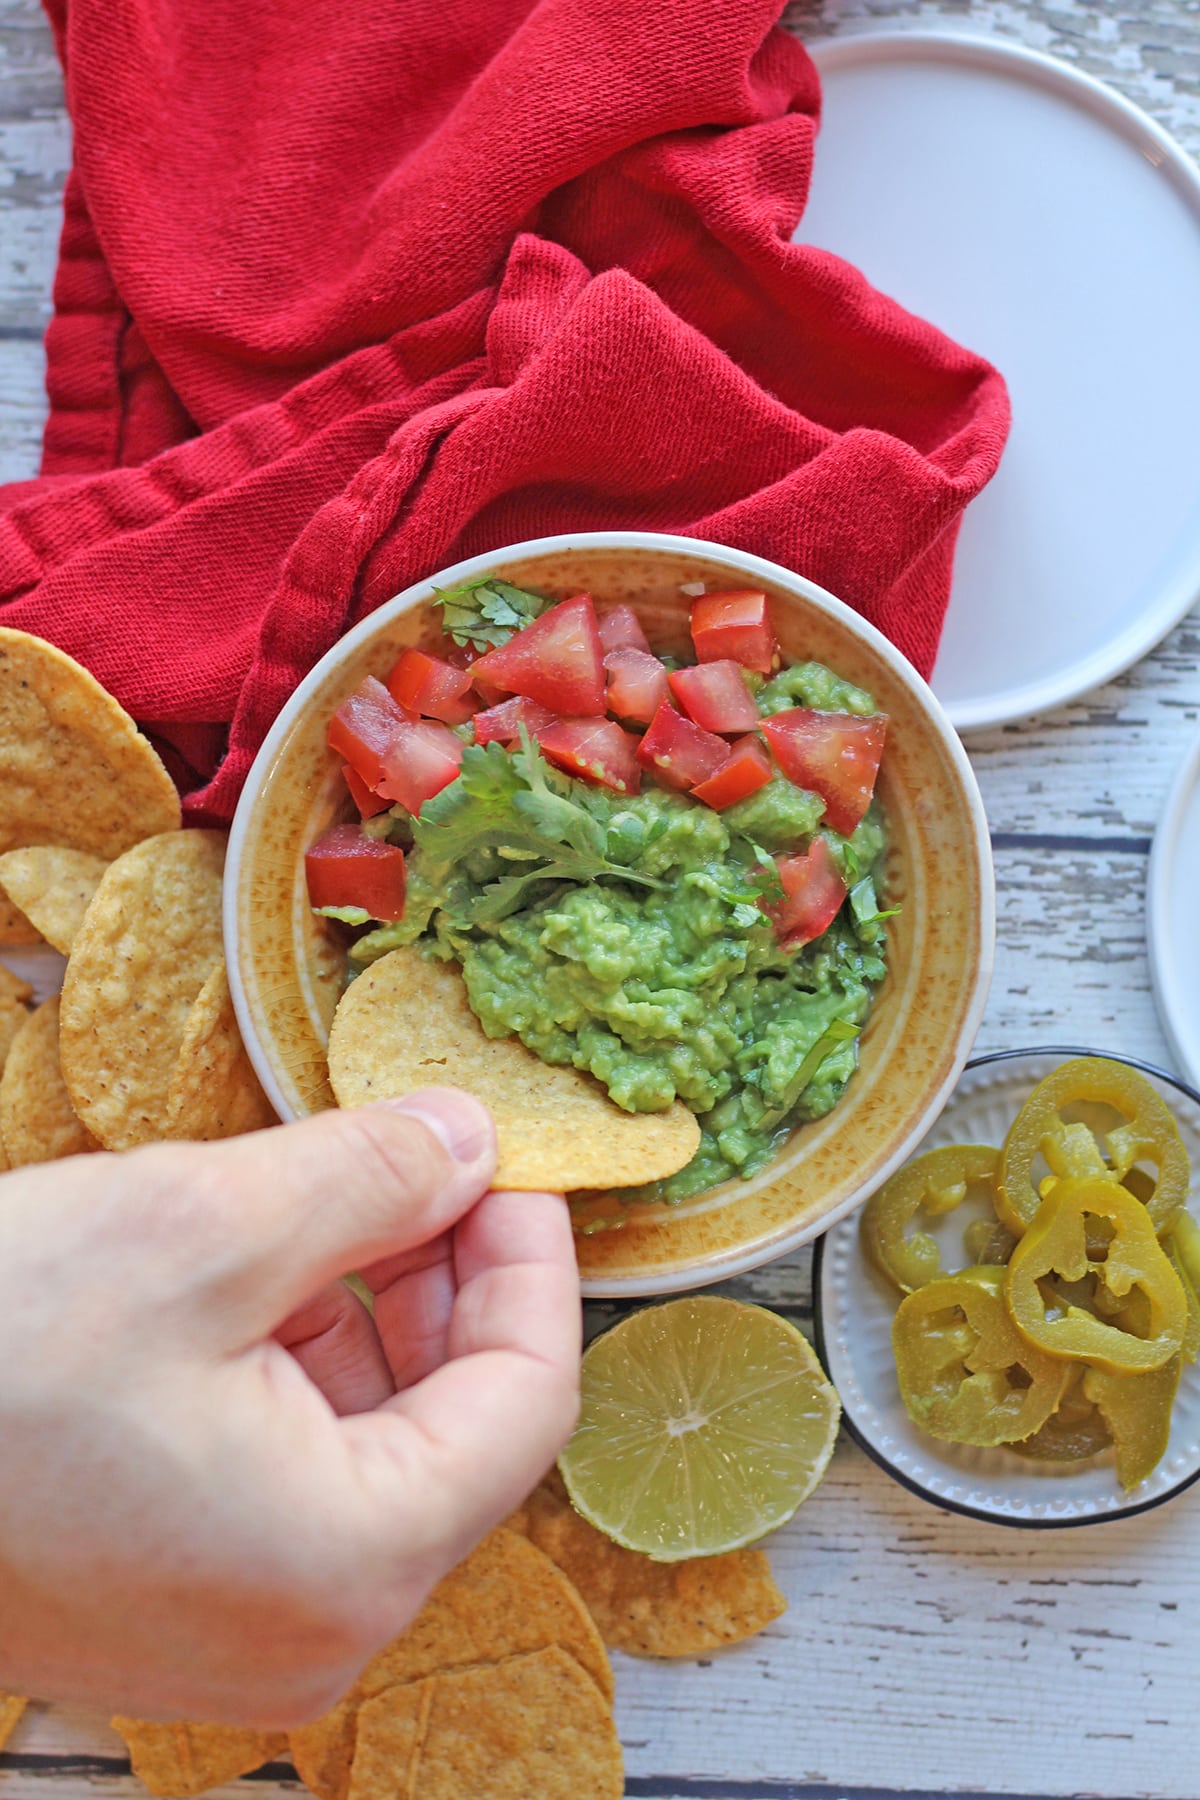 Tortilla chip being dipped into guacamole.